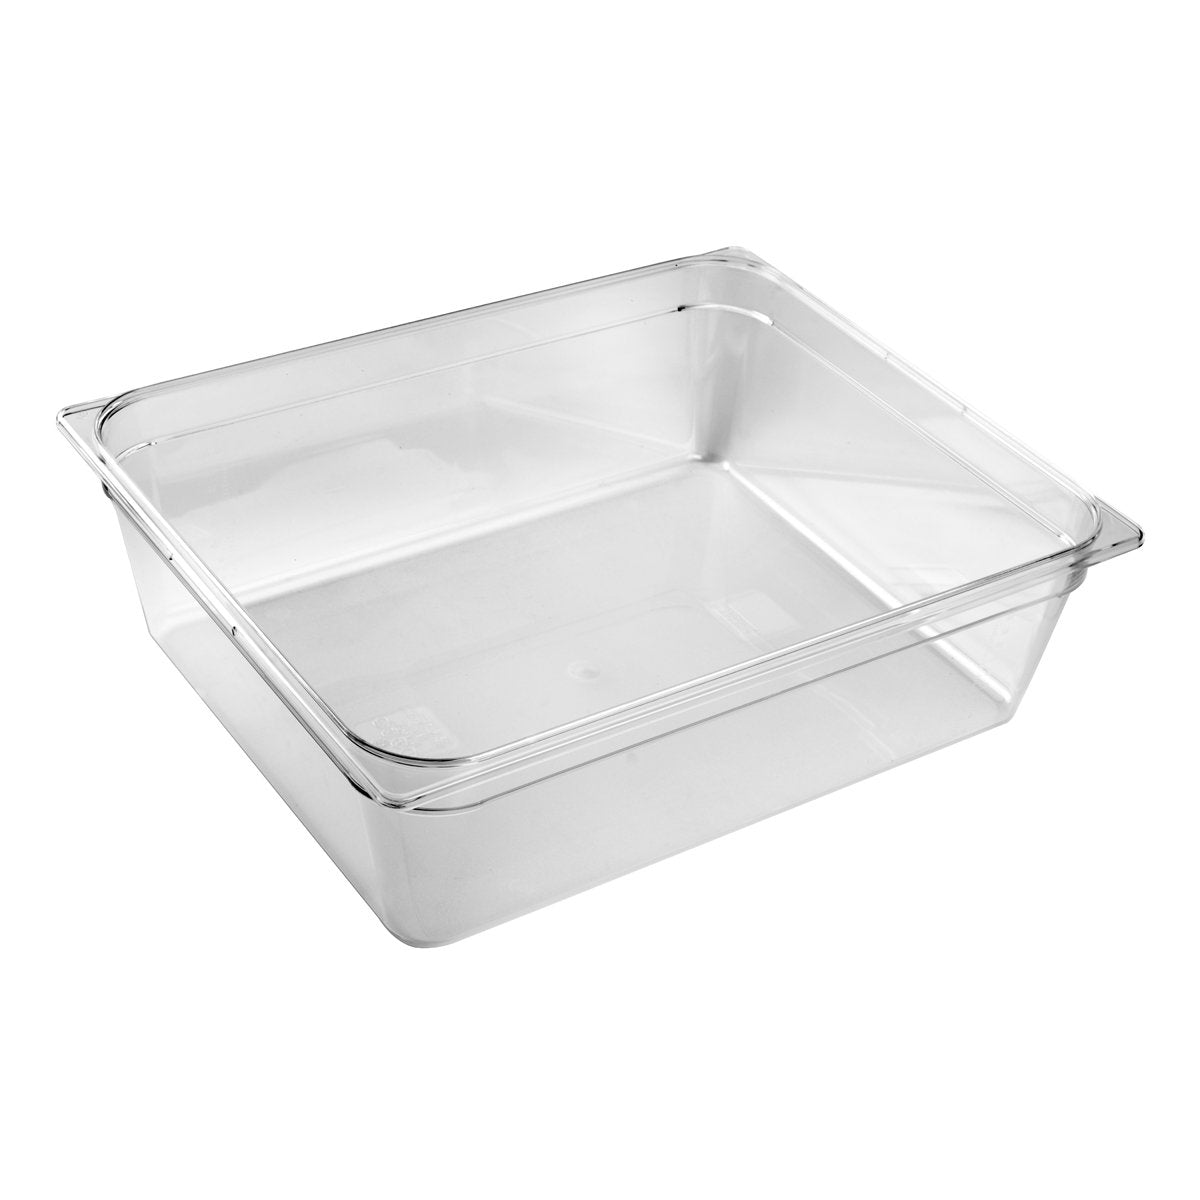 PC-21200CL Inox Macel Gastronorm Pan Polycarbonate onate Clear 2/1 Size 200mm  Tomkin Australia Hospitality Supplies